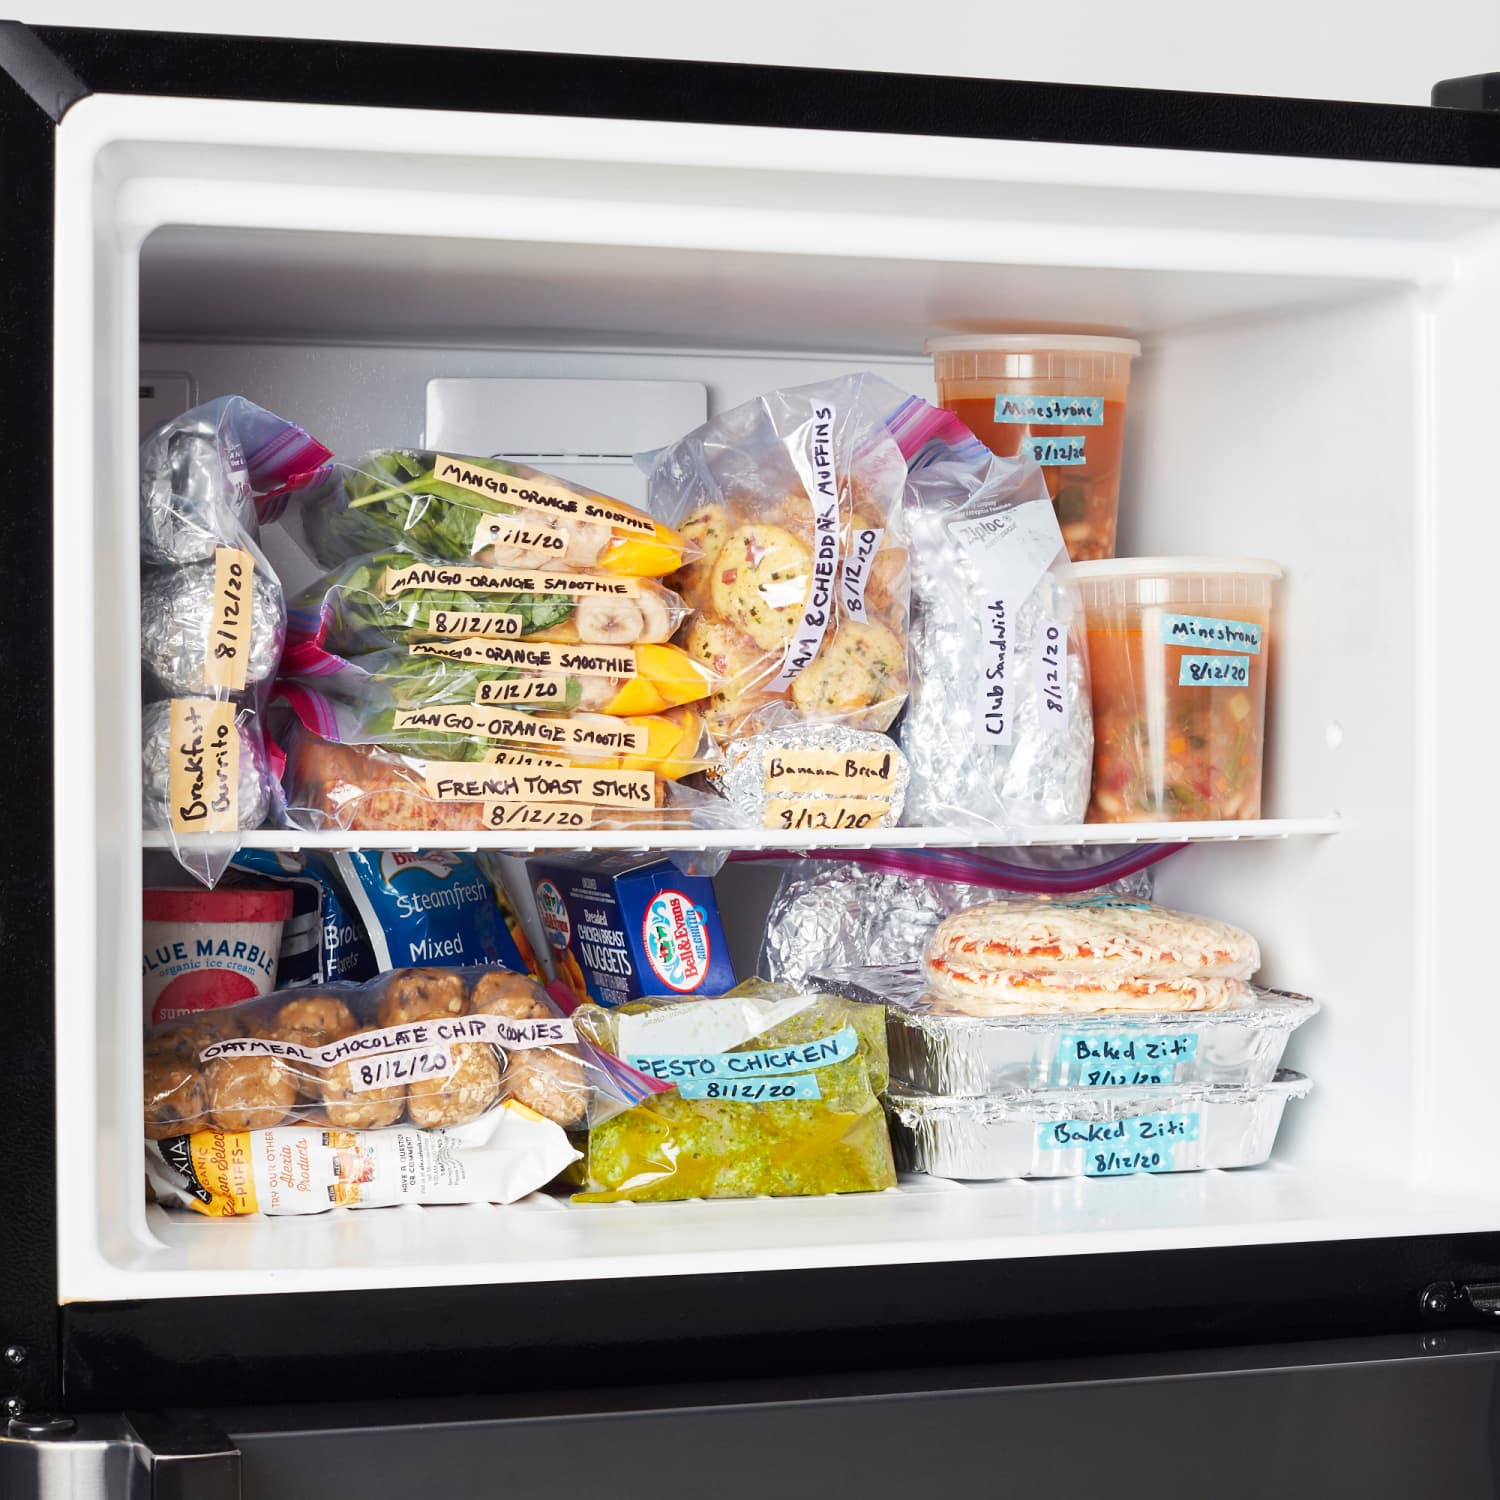 Our favourite tips to efficiently organise your freezer